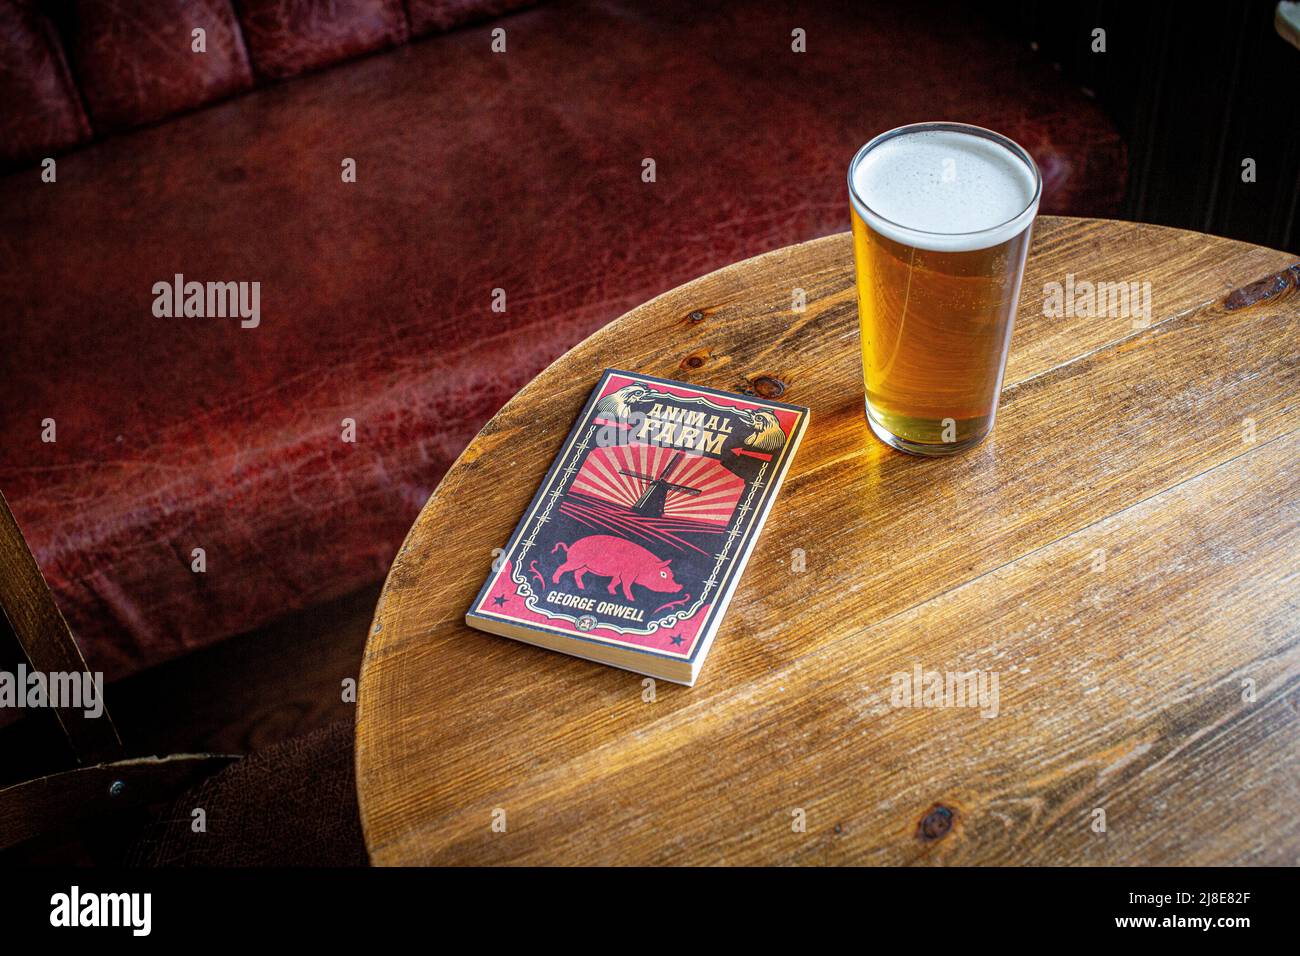 Animal Farm book by George Orwell with pint of lager  at The Dog and Duck pub, Soho, London, England, Stock Photo